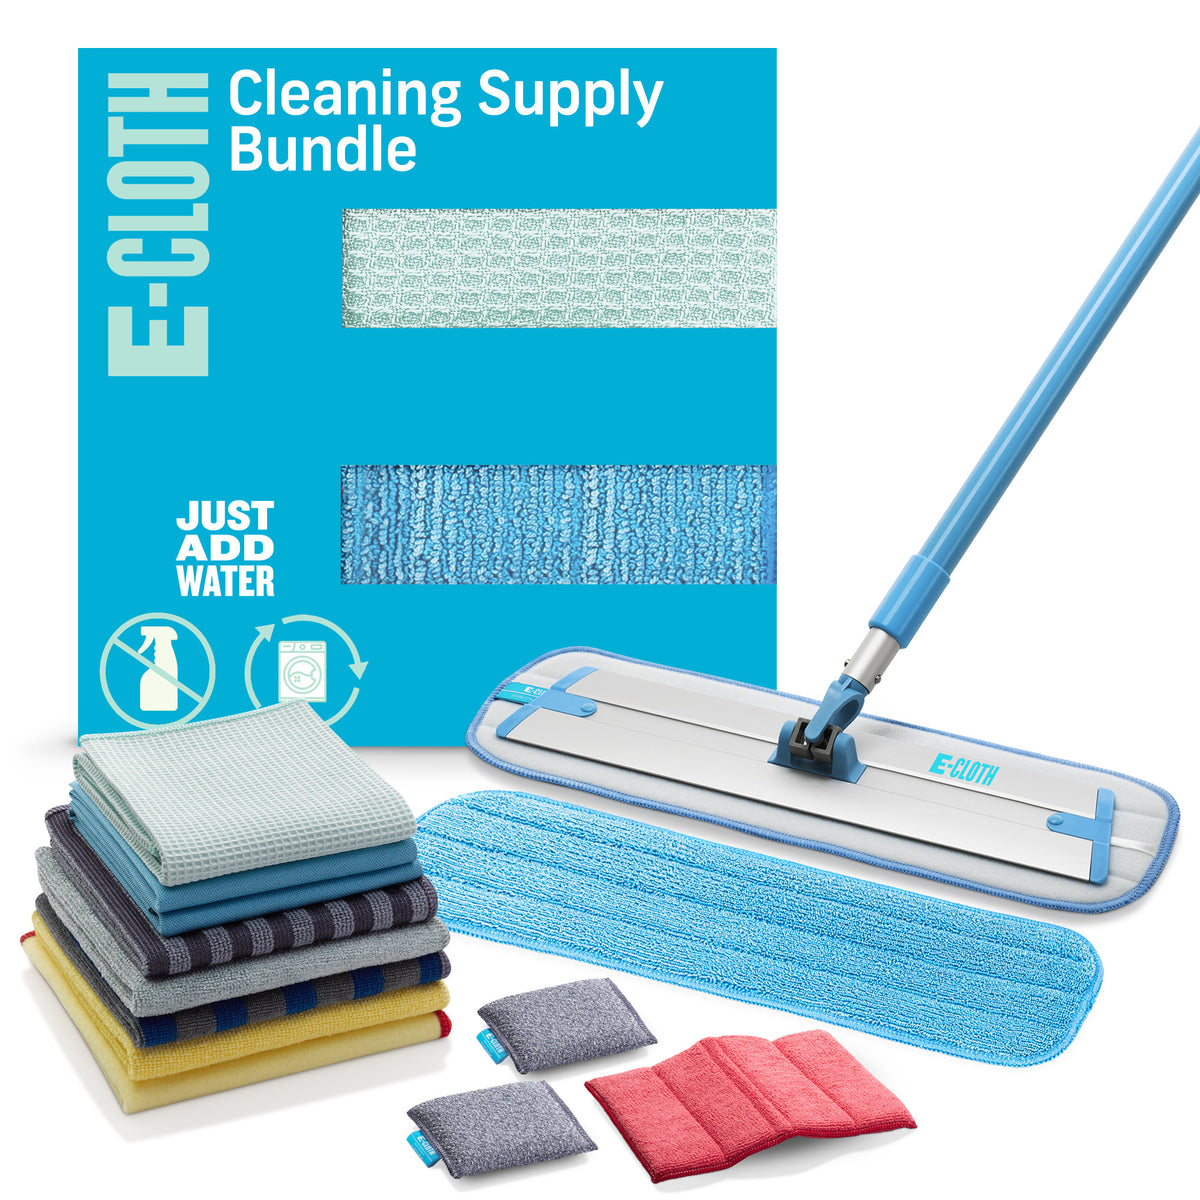 Cleaning Supply Bundle